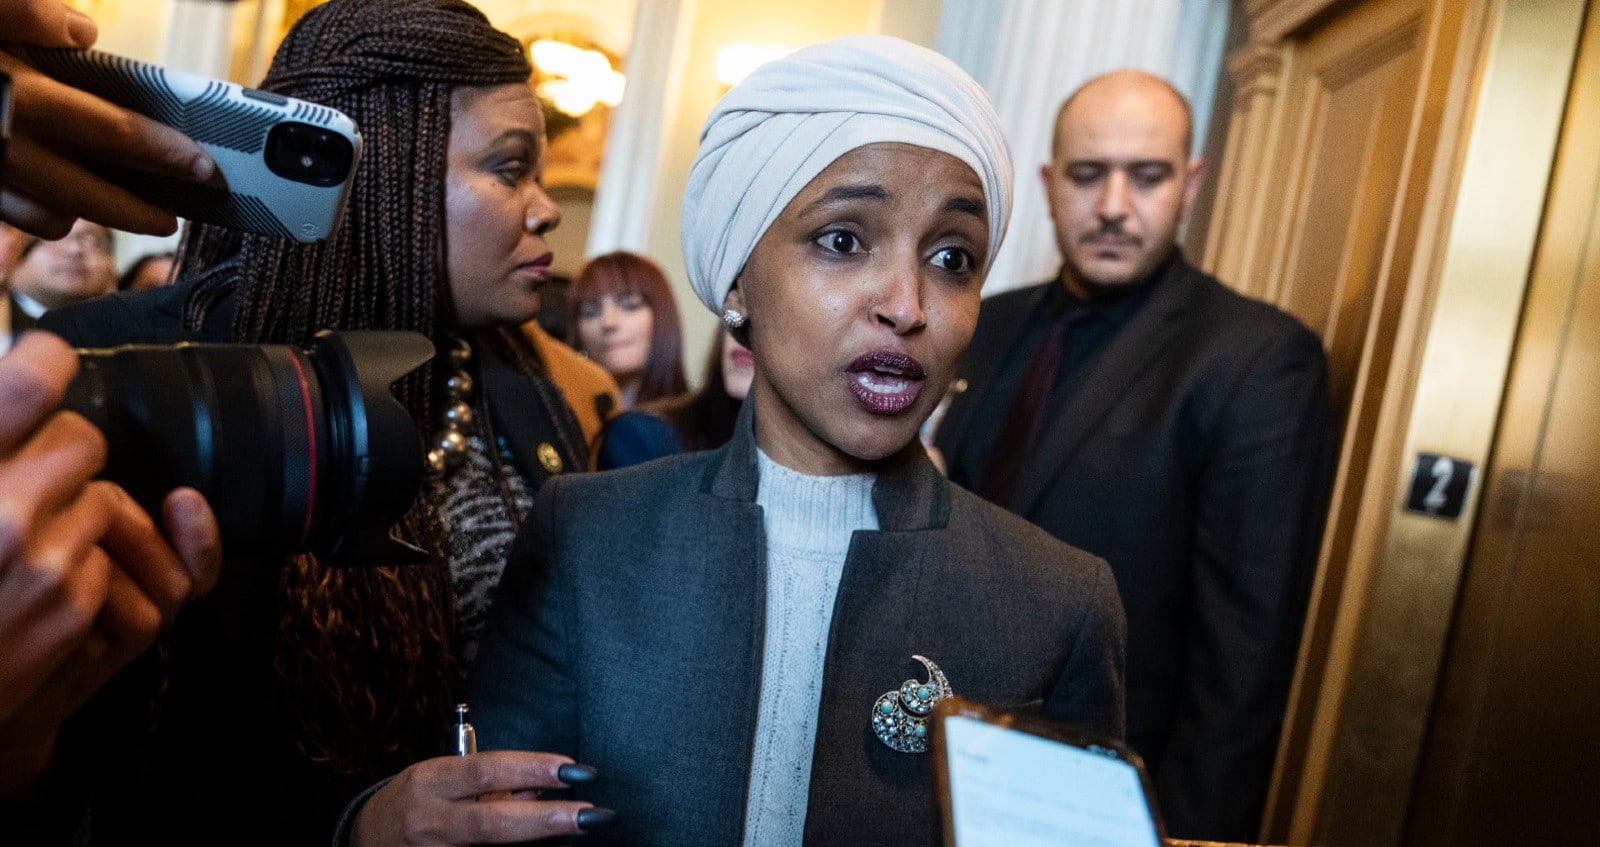 Calls Pour In To Remover Ilhan Omar From Congress Over ‘Advocacy’ For Somalia – Trump News Today